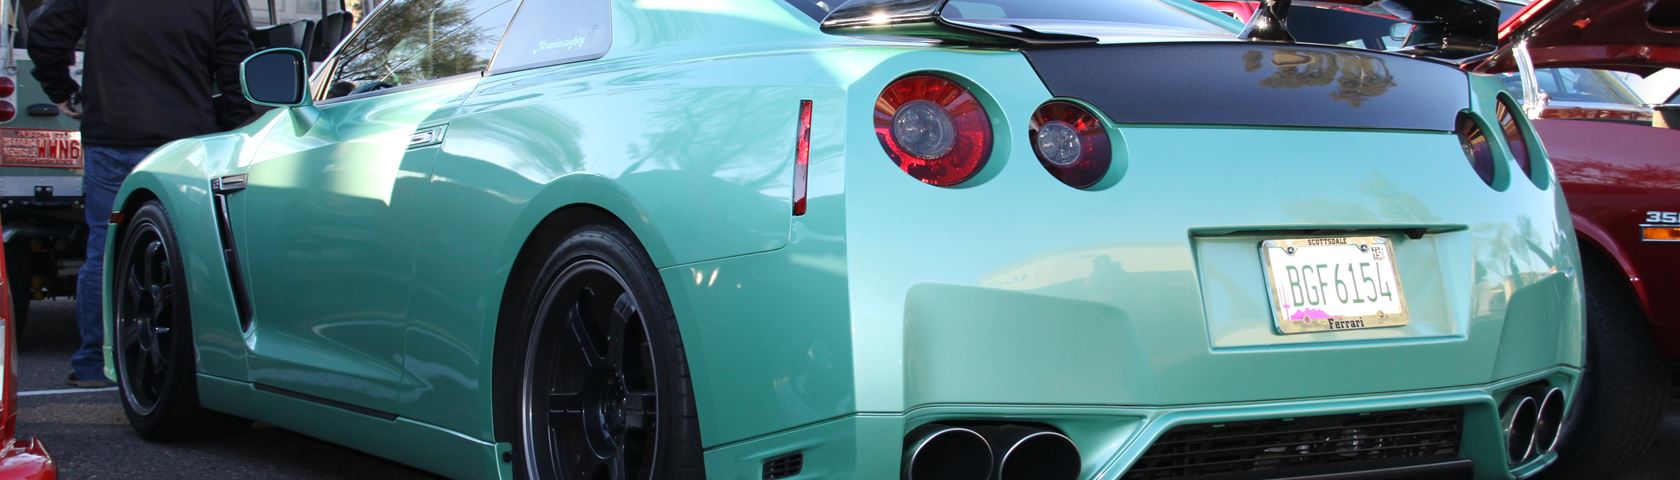 A Sea Foam Green Nissan GTR (Driven by a 16 Year Old That Purchased It)